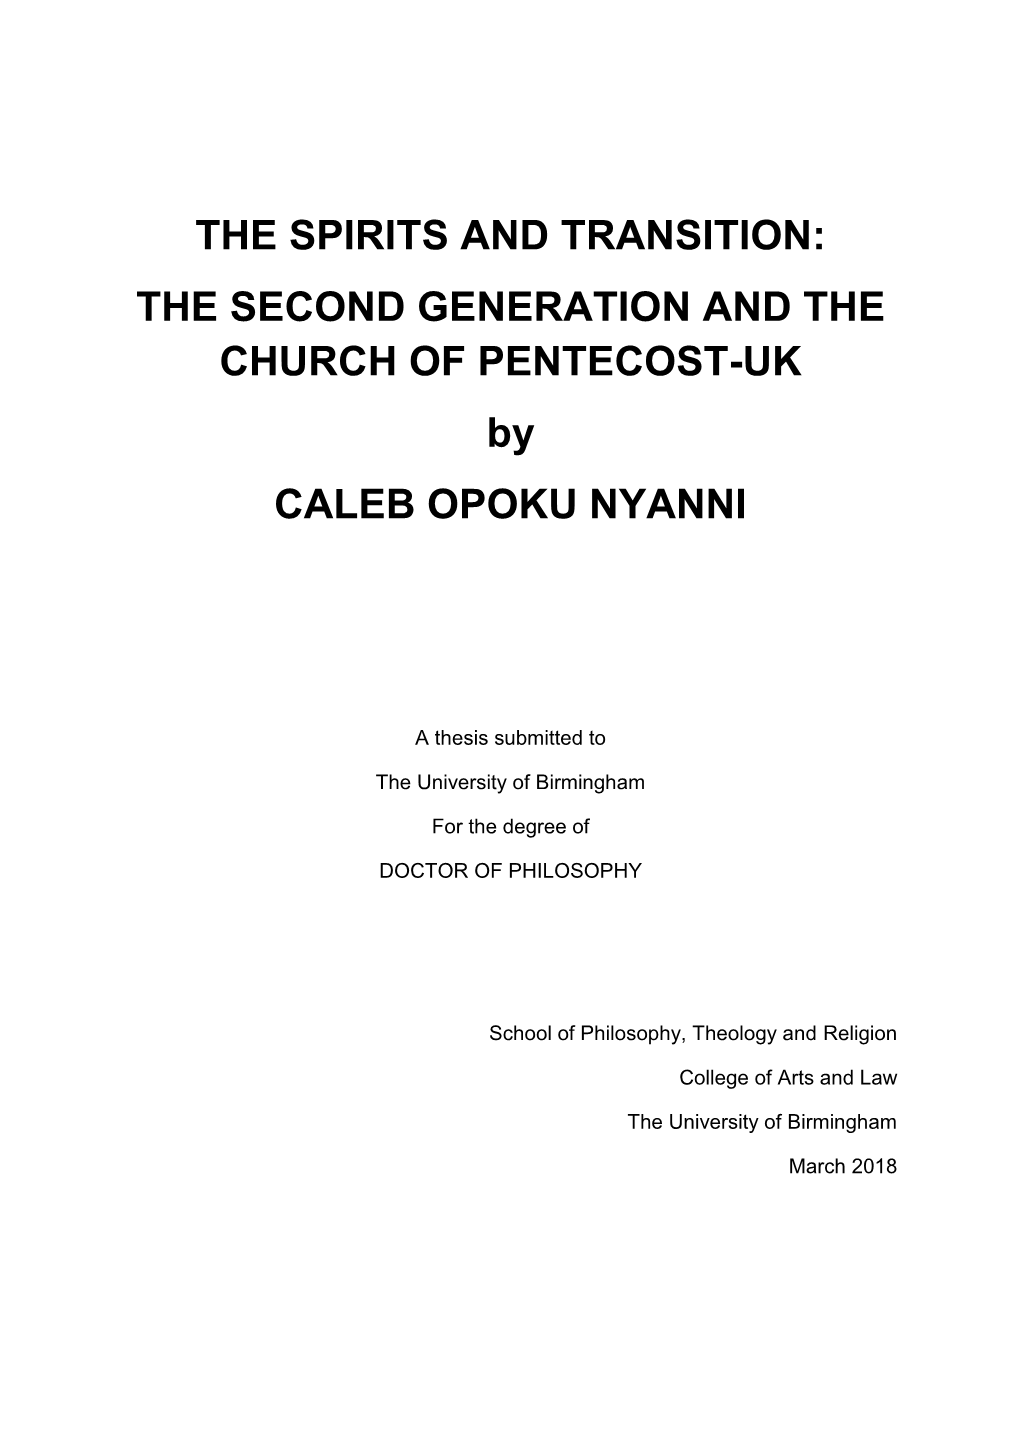 THE SECOND GENERATION and the CHURCH of PENTECOST-UK by CALEB OPOKU NYANNI